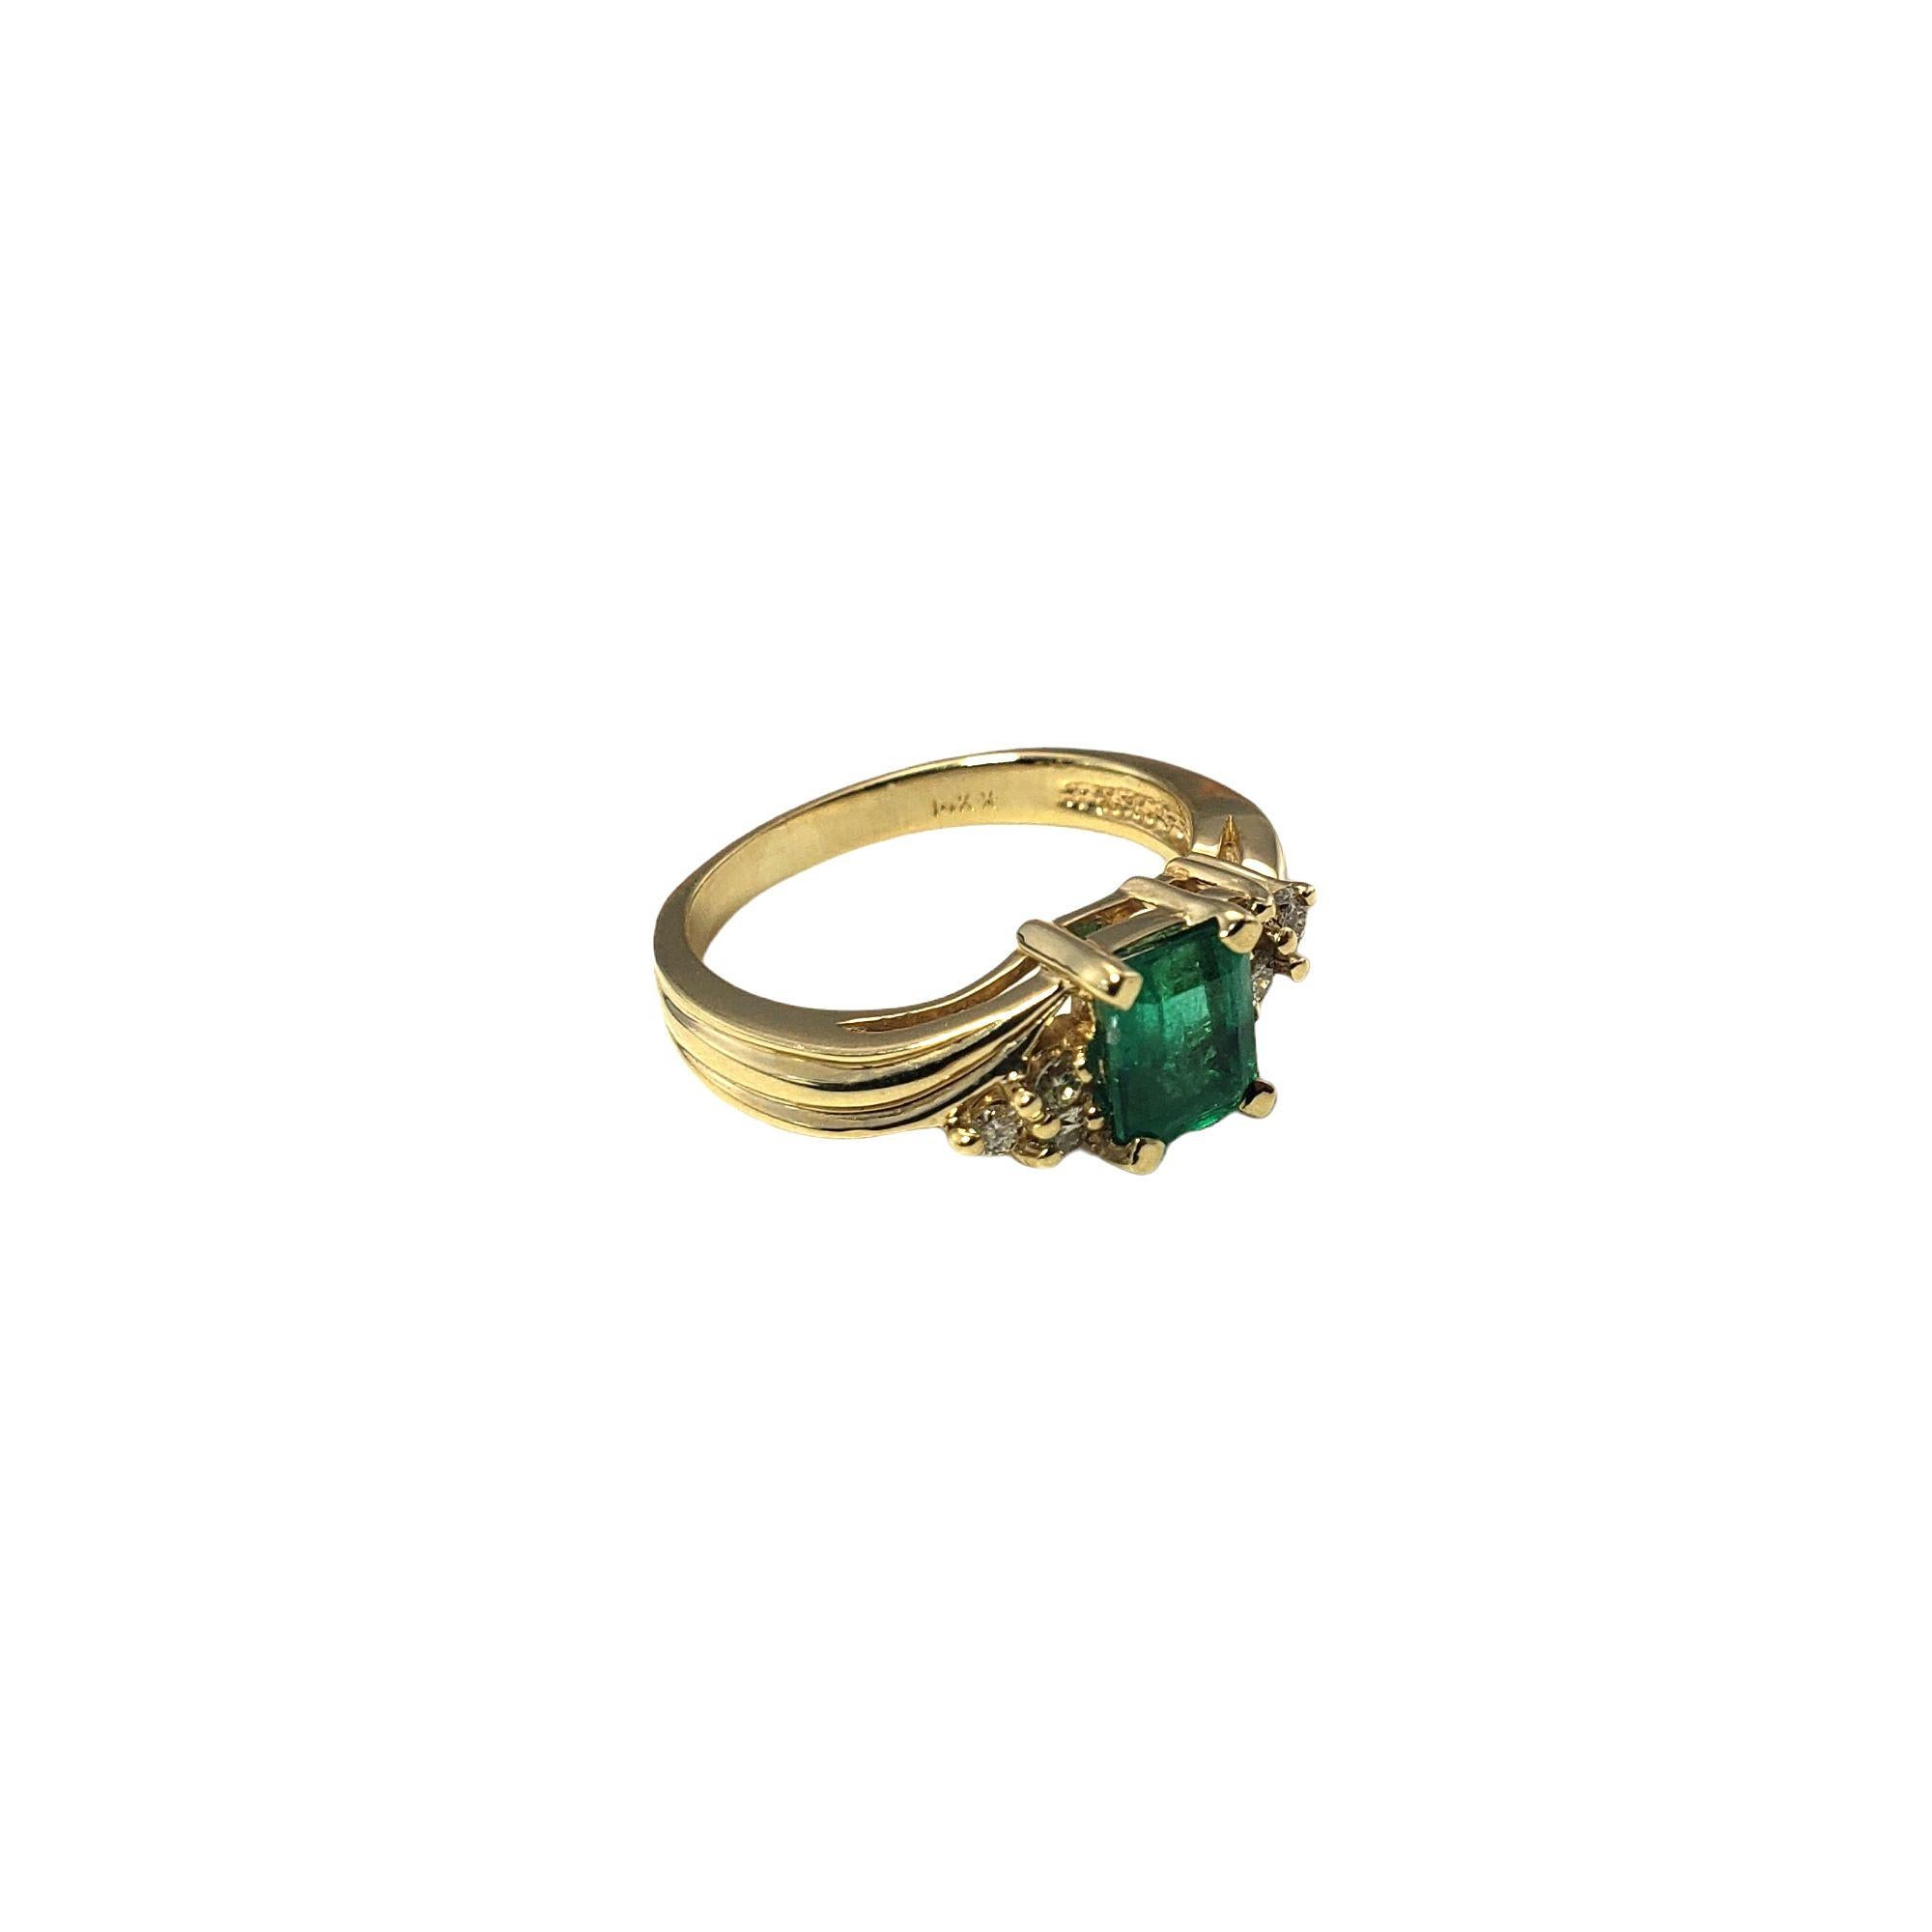 Vintage 14 Karat Yellow Gold Emerald and Diamond Ring Size 5

This stunning ring features one emerald (6 mm x 5 mm) and six round brilliant cut diamonds set in classic 14K yellow gold.
Shank: 2 mm.

Approximate total diamond weight: .10 ct.

Diamond